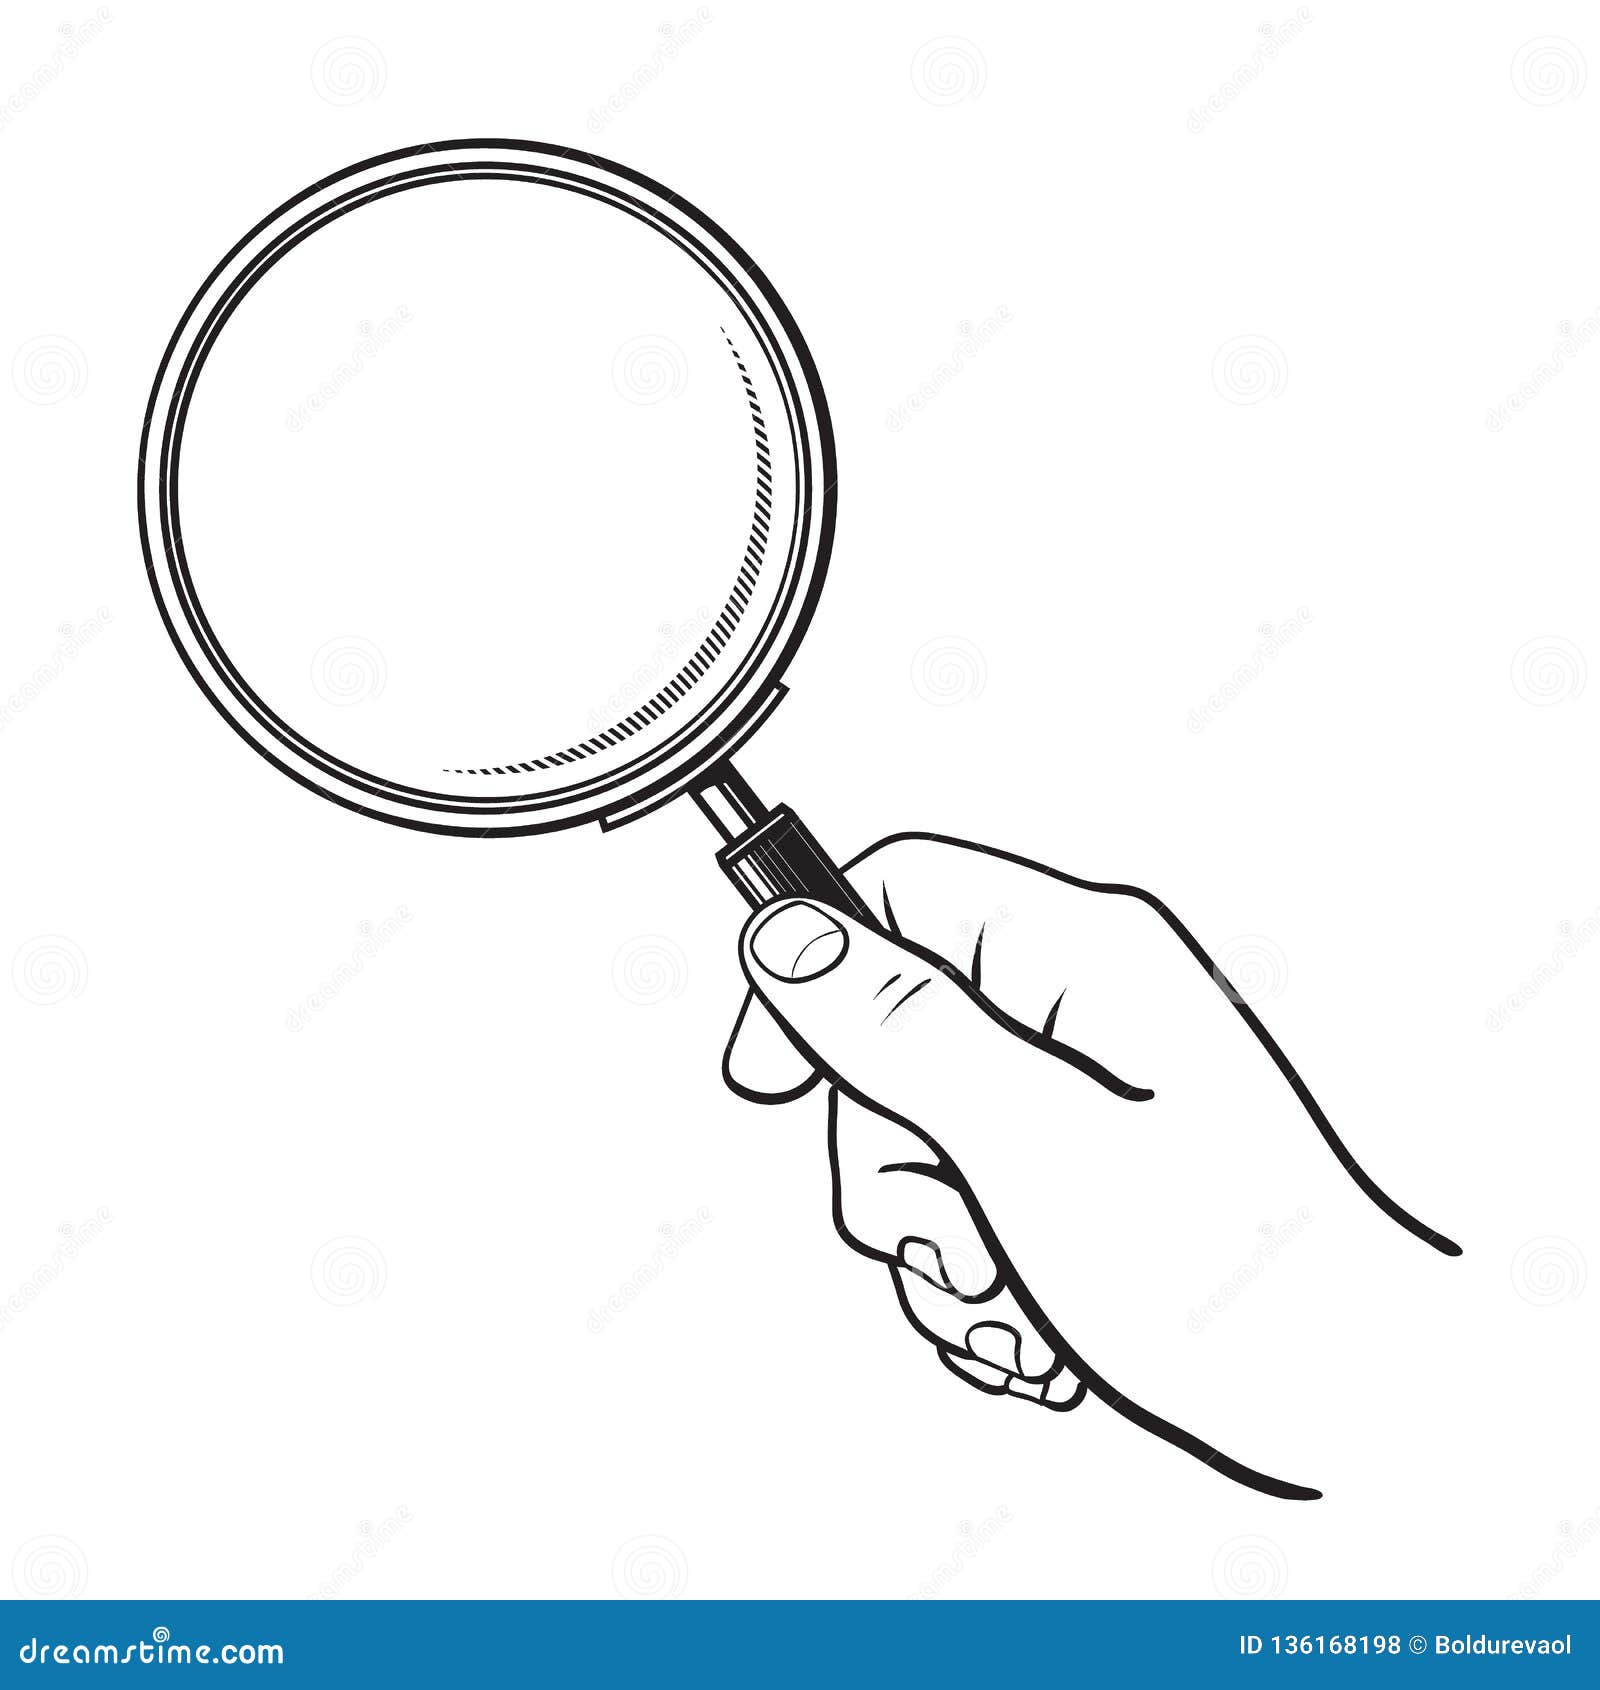 How to Draw a Magnifying Glass  Easy Drawing  Coloring  YouTube